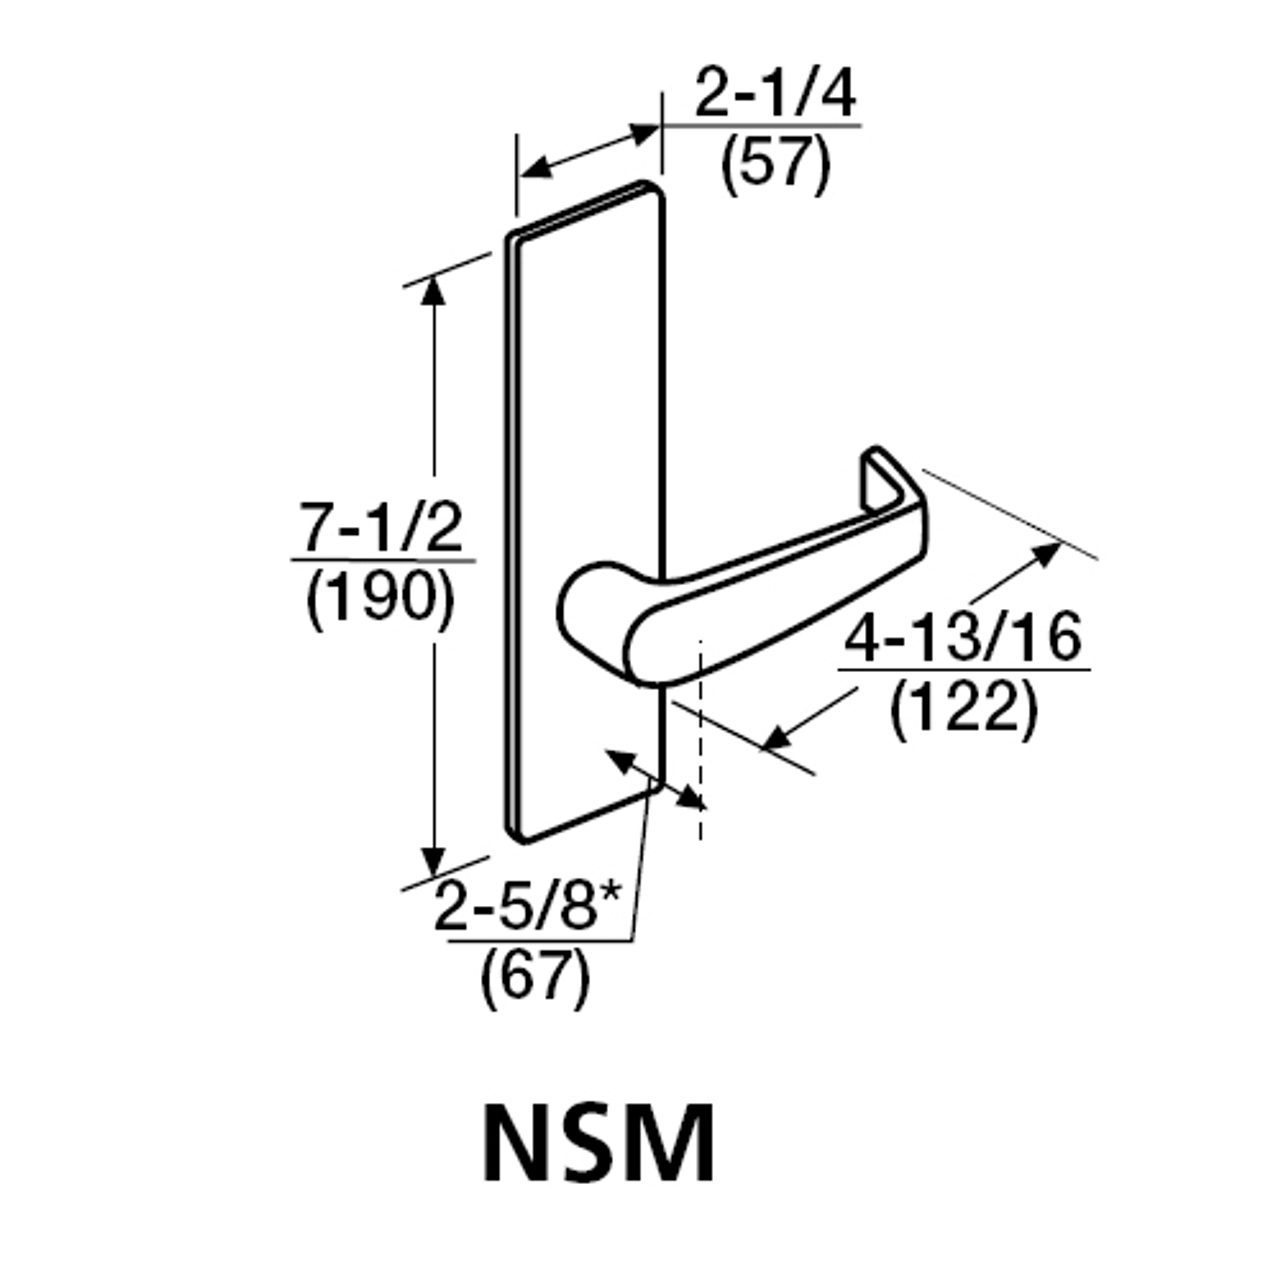 ML2053-NSM-619-CL6 Corbin Russwin ML2000 Series IC 6-Pin Less Core Mortise Entrance Locksets with Newport Lever in Satin Nickel